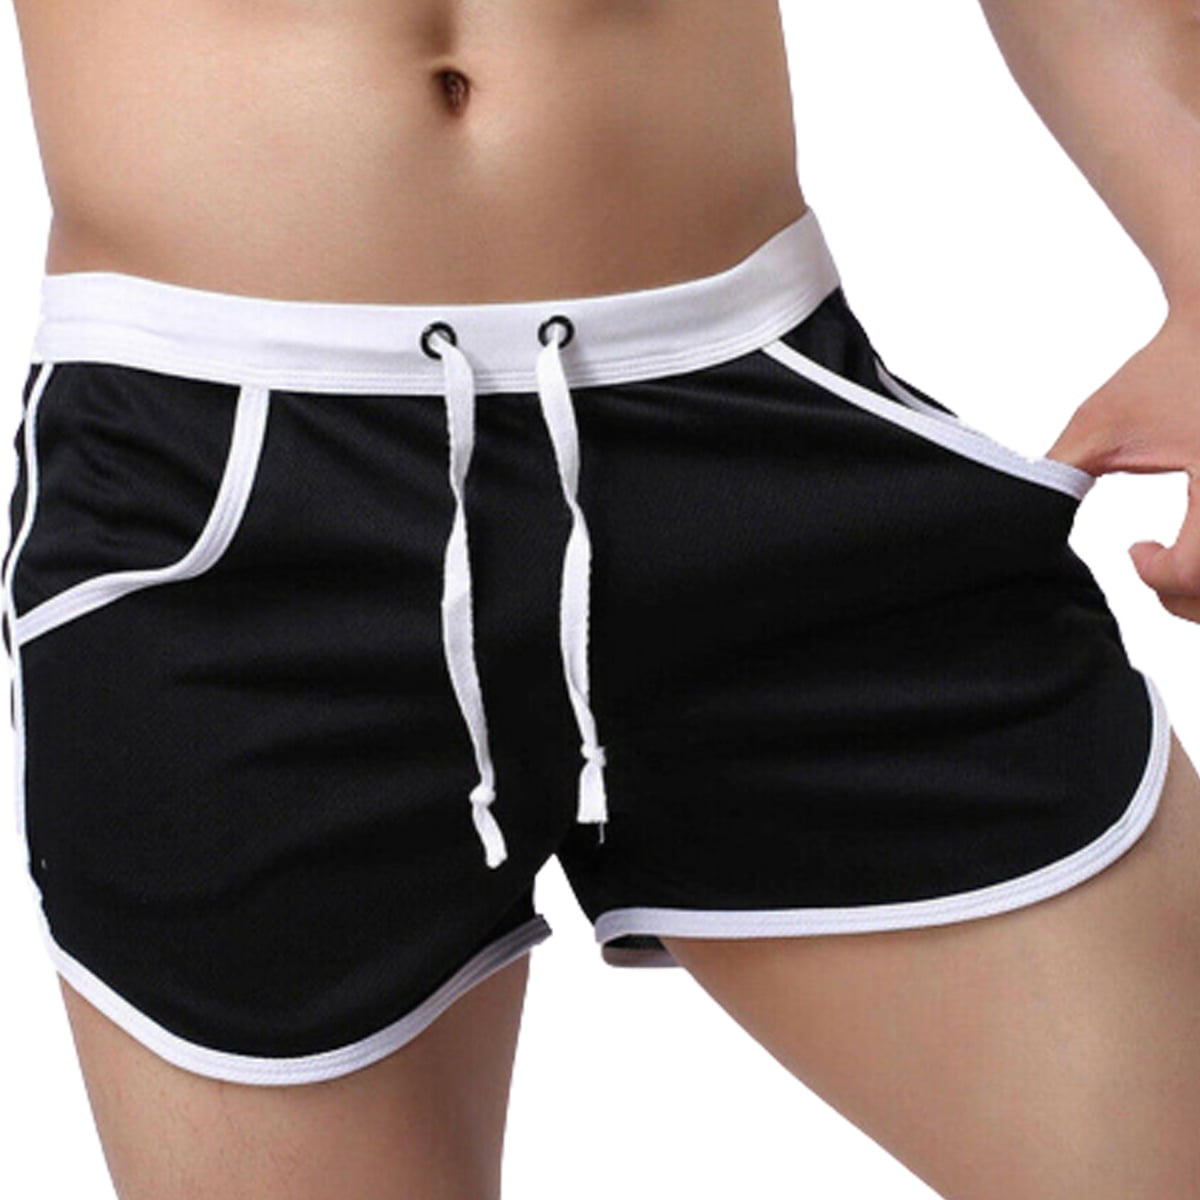 Men's Gym Shorts Training Running Sport Workout Casual Jogging Pants Trousers